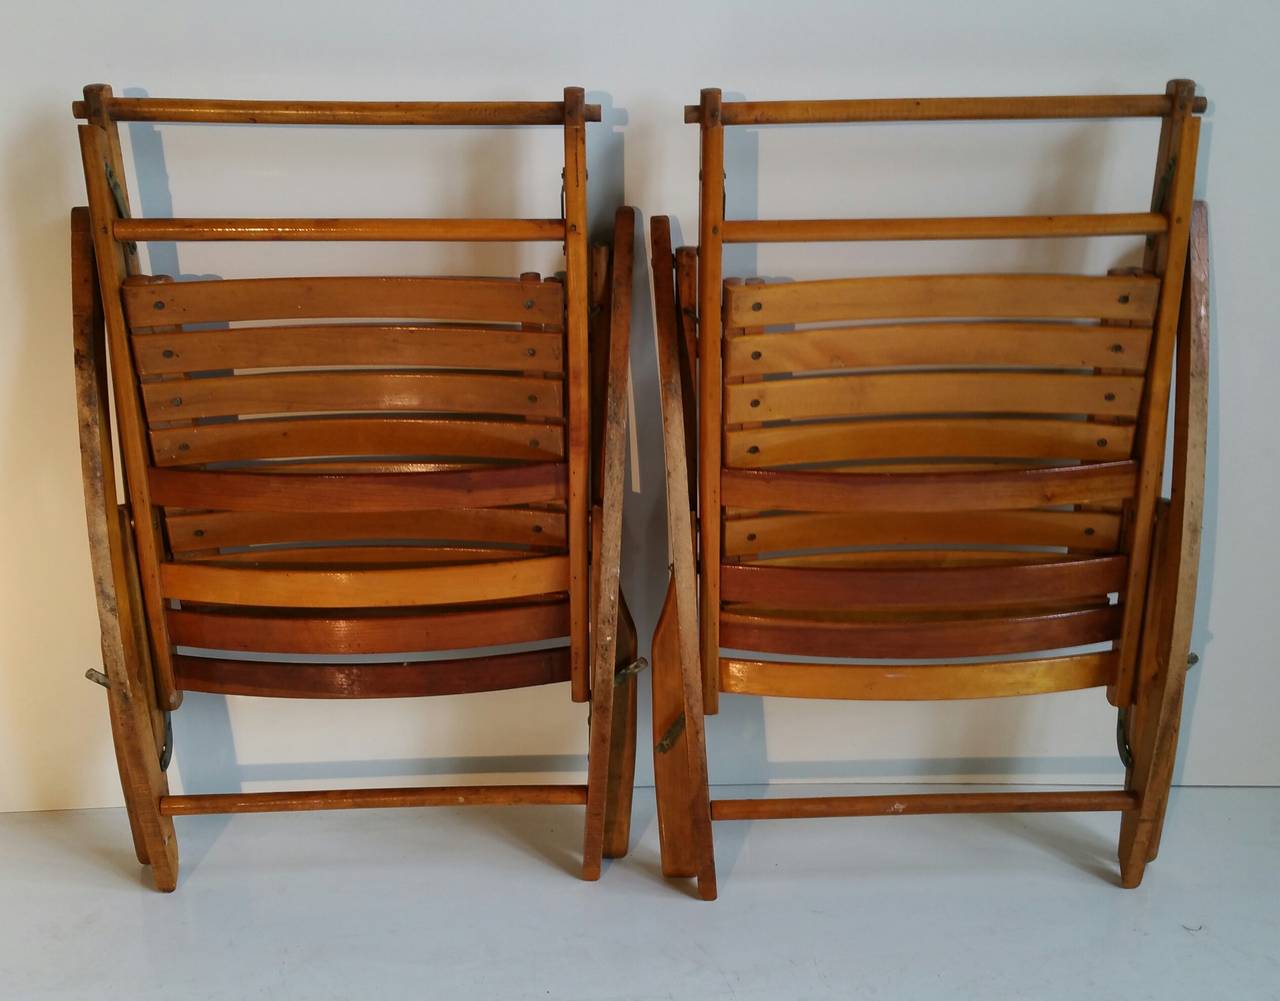 20th Century Pair of Modernist Folding Slatted Rocking Chairs by Telescope Folding Chair Co.